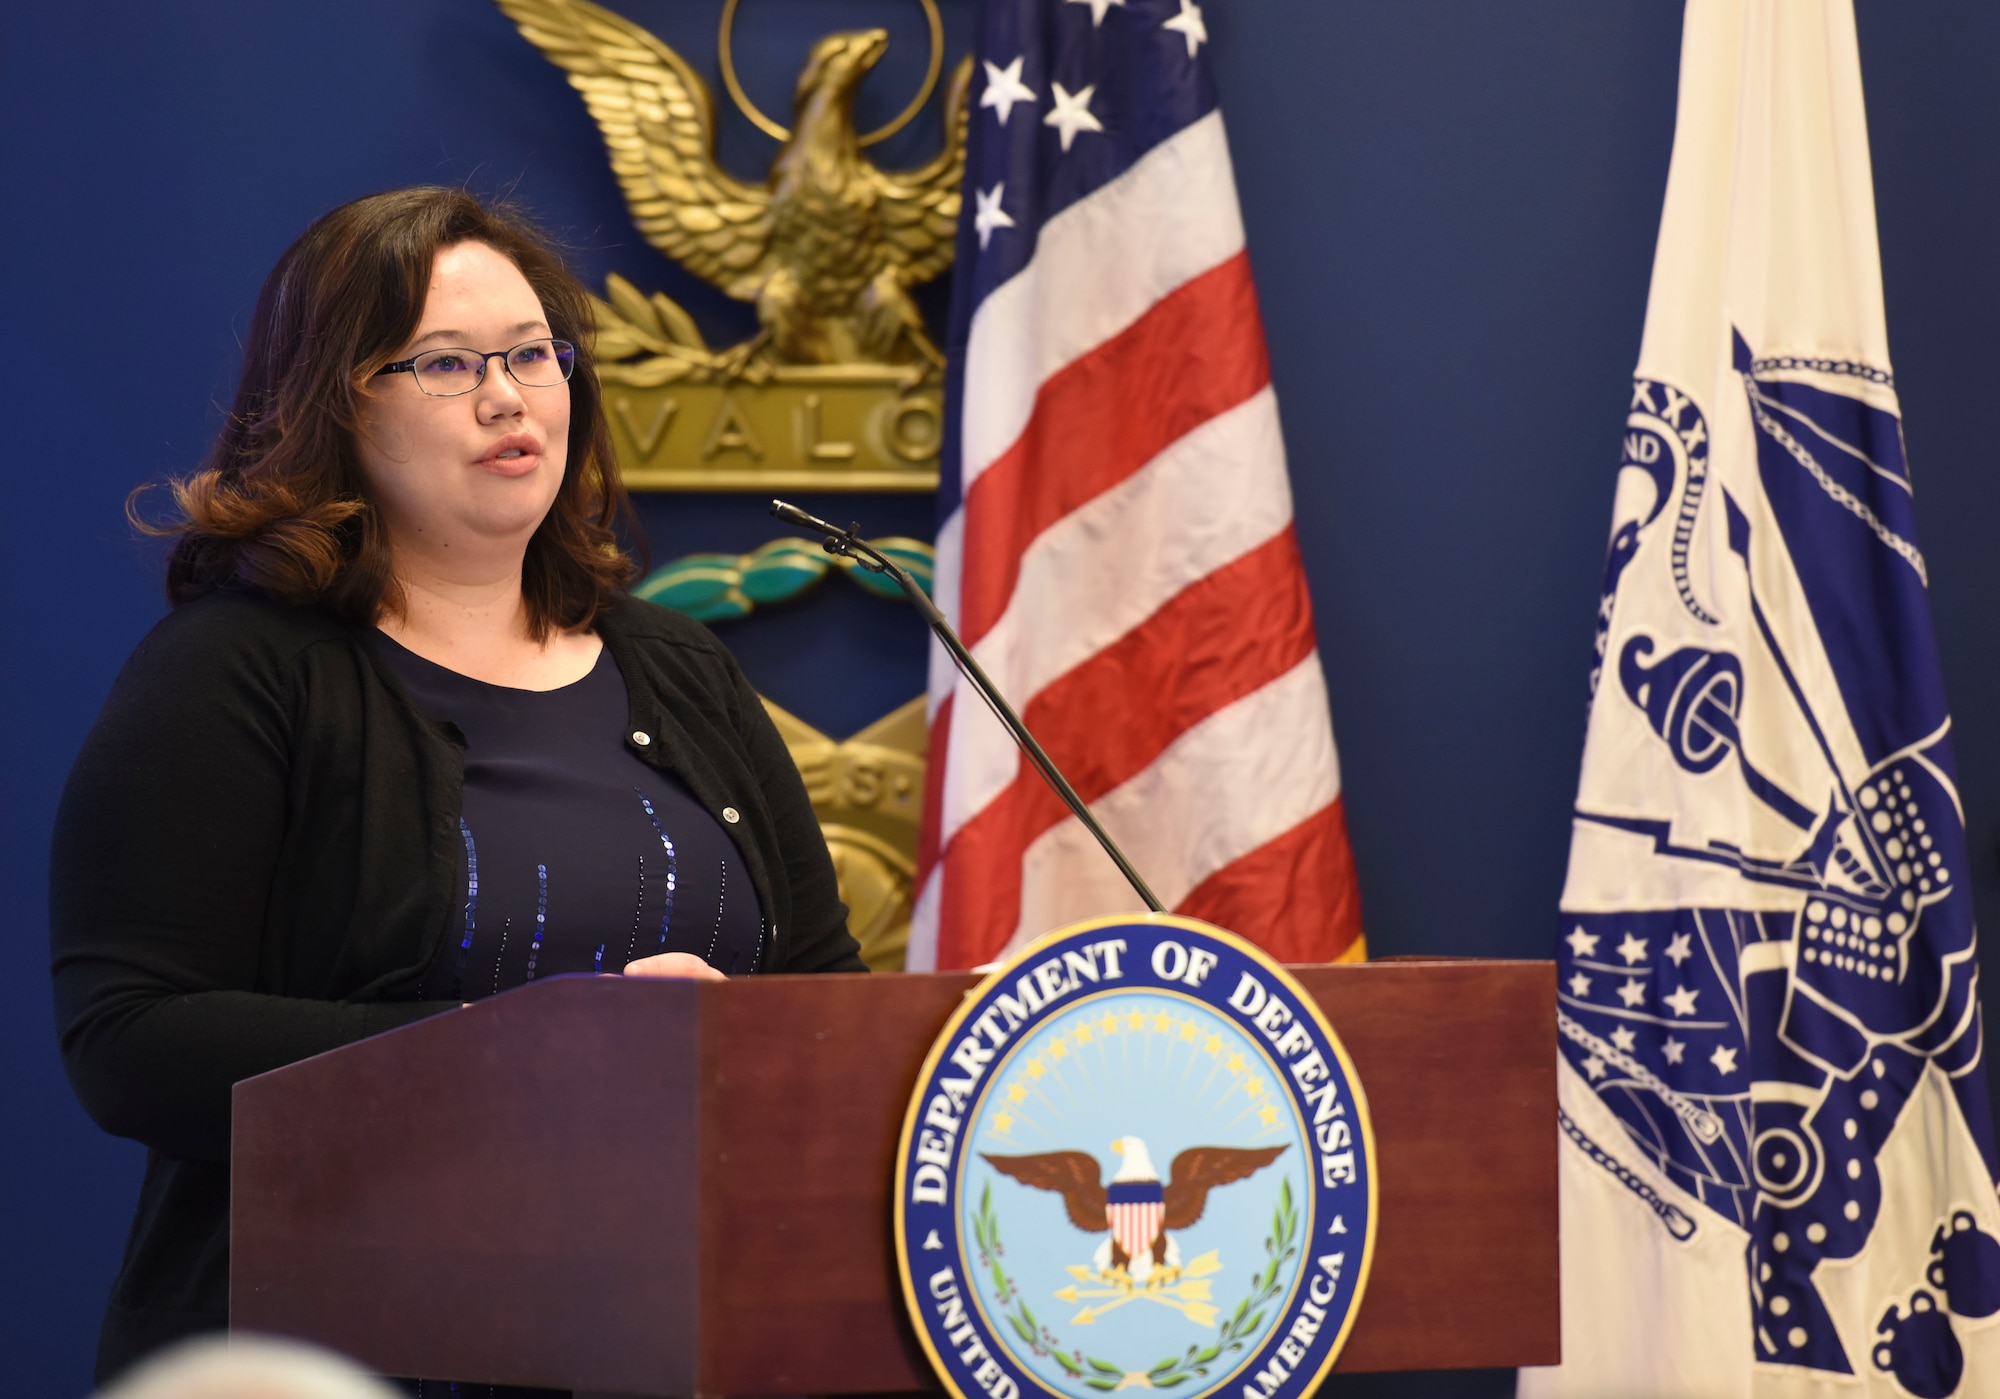 Ms. Michelle Aldana, 35th Fighter Wing, Misawa Air Base Japan, gives her remarks during the 2018 Defense Suicide Prevention Month Recognition Ceremony at the Pentagon, in Arlington, Va., May 15, 2019. Misawa AB was recognized by DoD two years in a row for suicide prevention outreach. (U.S. Air Force photo by Tech Sgt. Anthony Nelson Jr.)